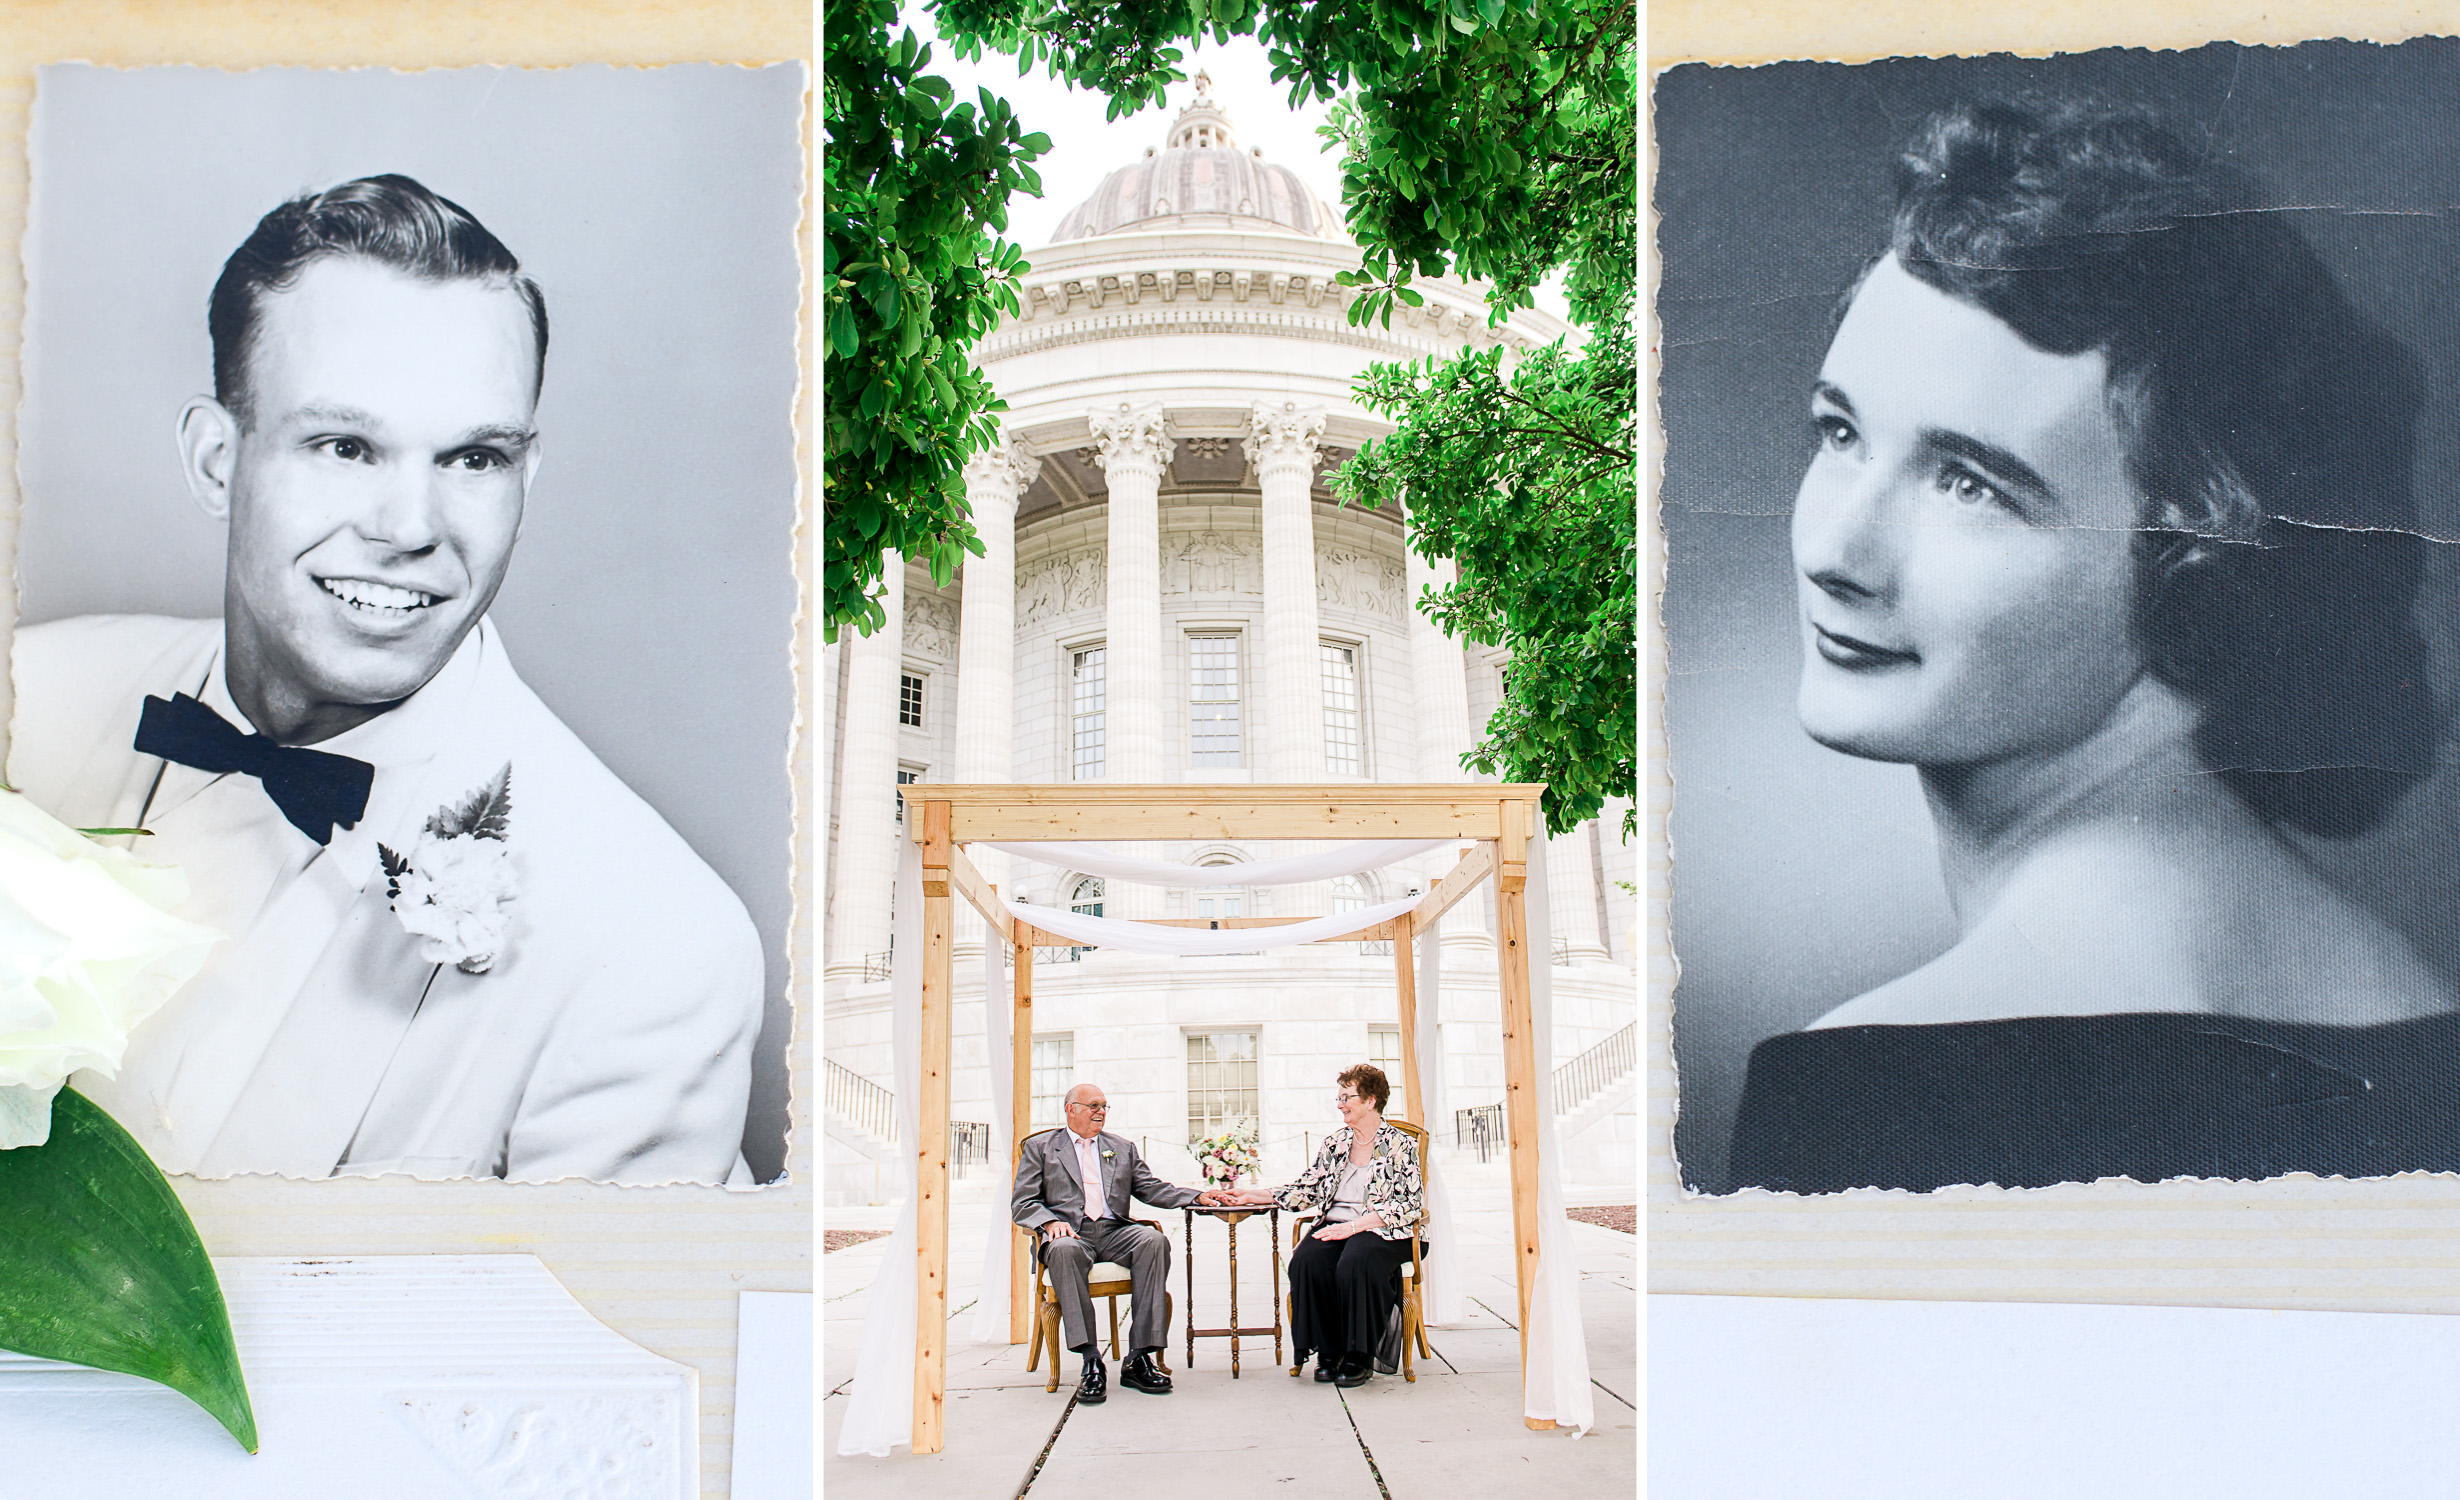 Old-engagement-photo-1956-Then-and-Now-60-Year-Anniversary